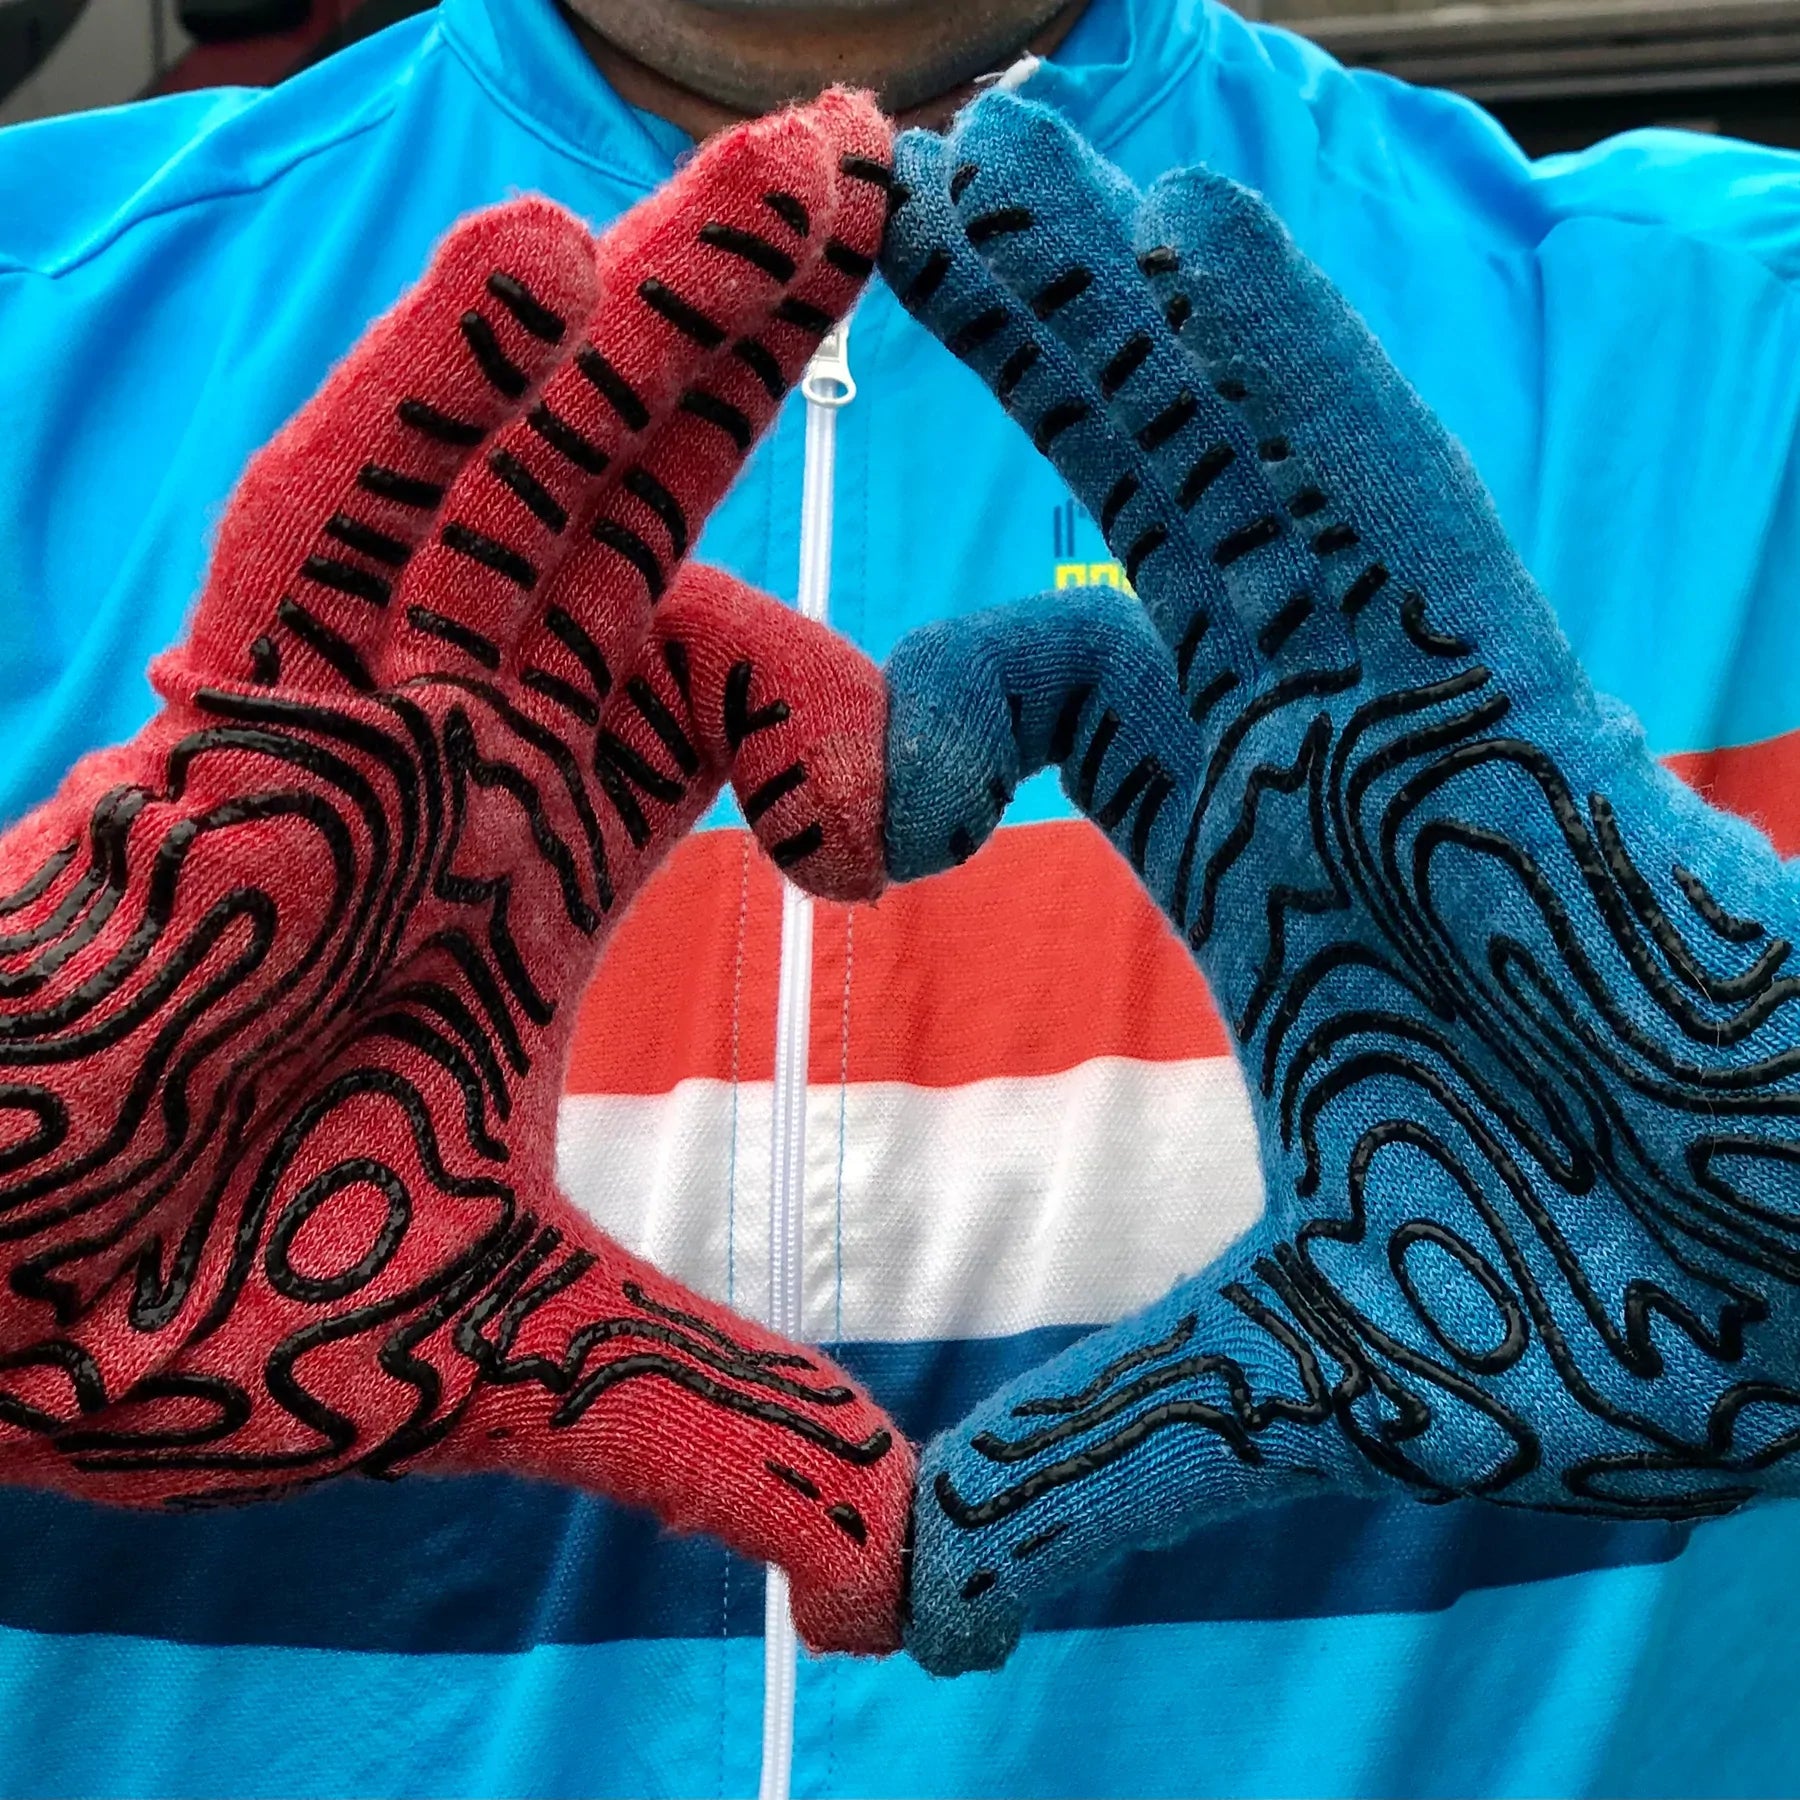 man wearing one red and one blue Merino wool DeFeet cycling glove with topo black grip lines on the palm